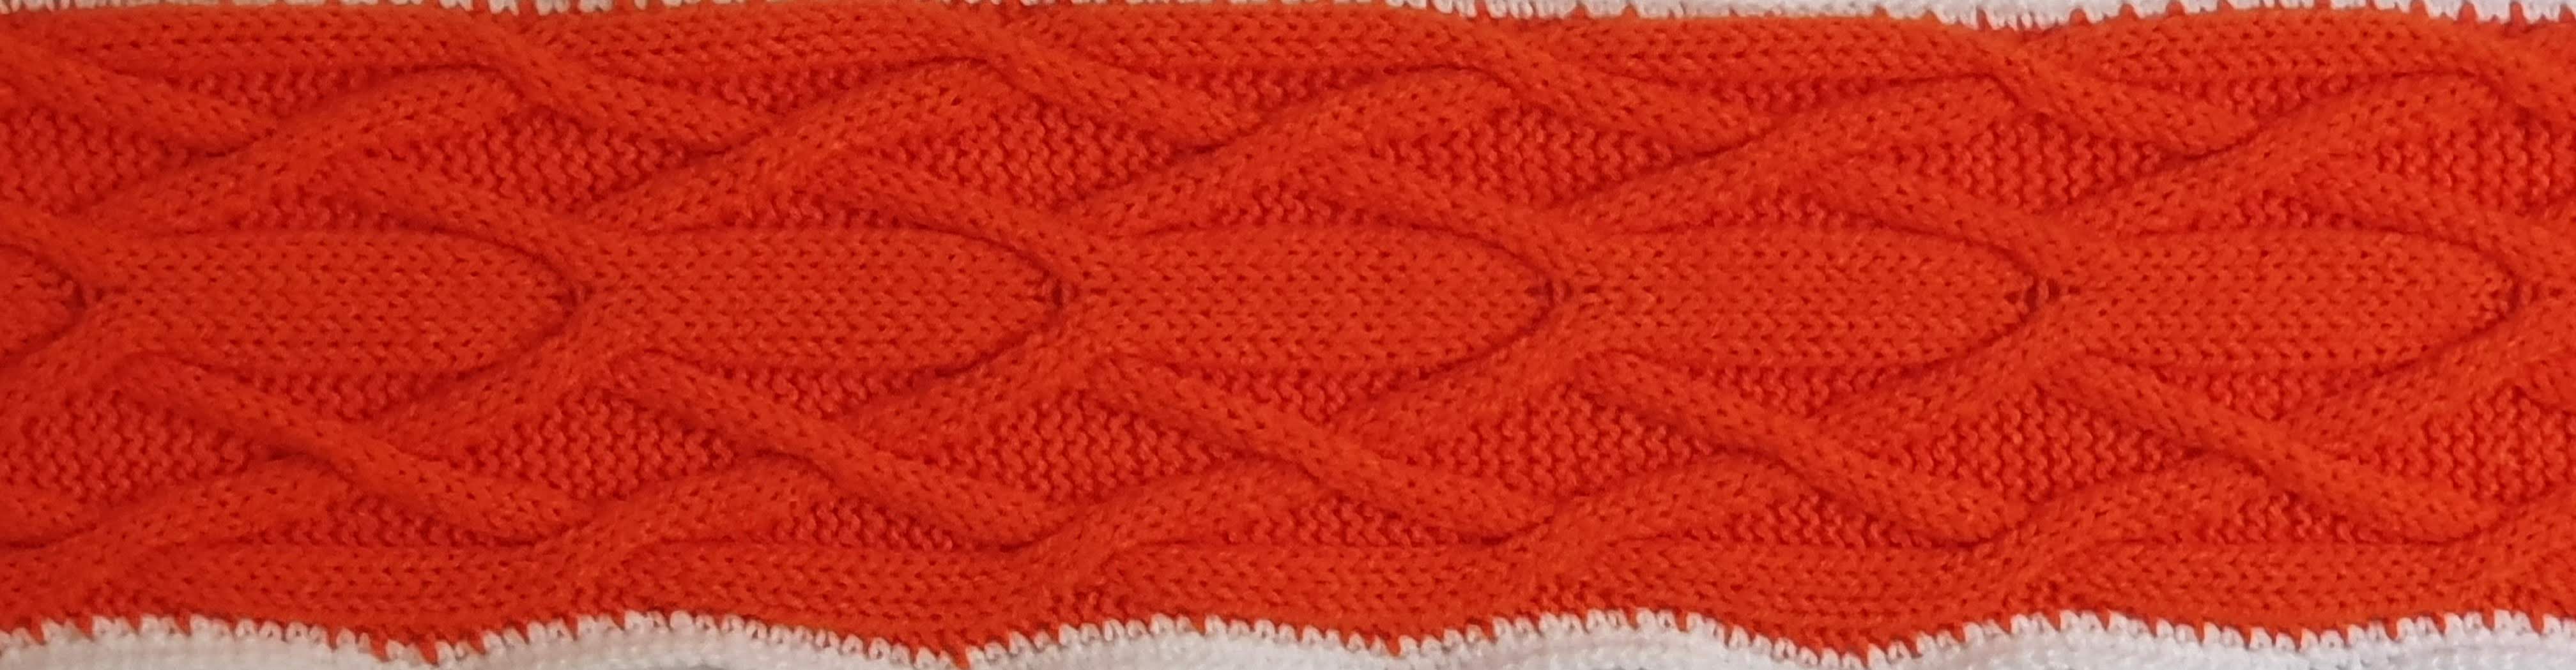 Orange with a central band that forks into two and then crosses on the outside edge